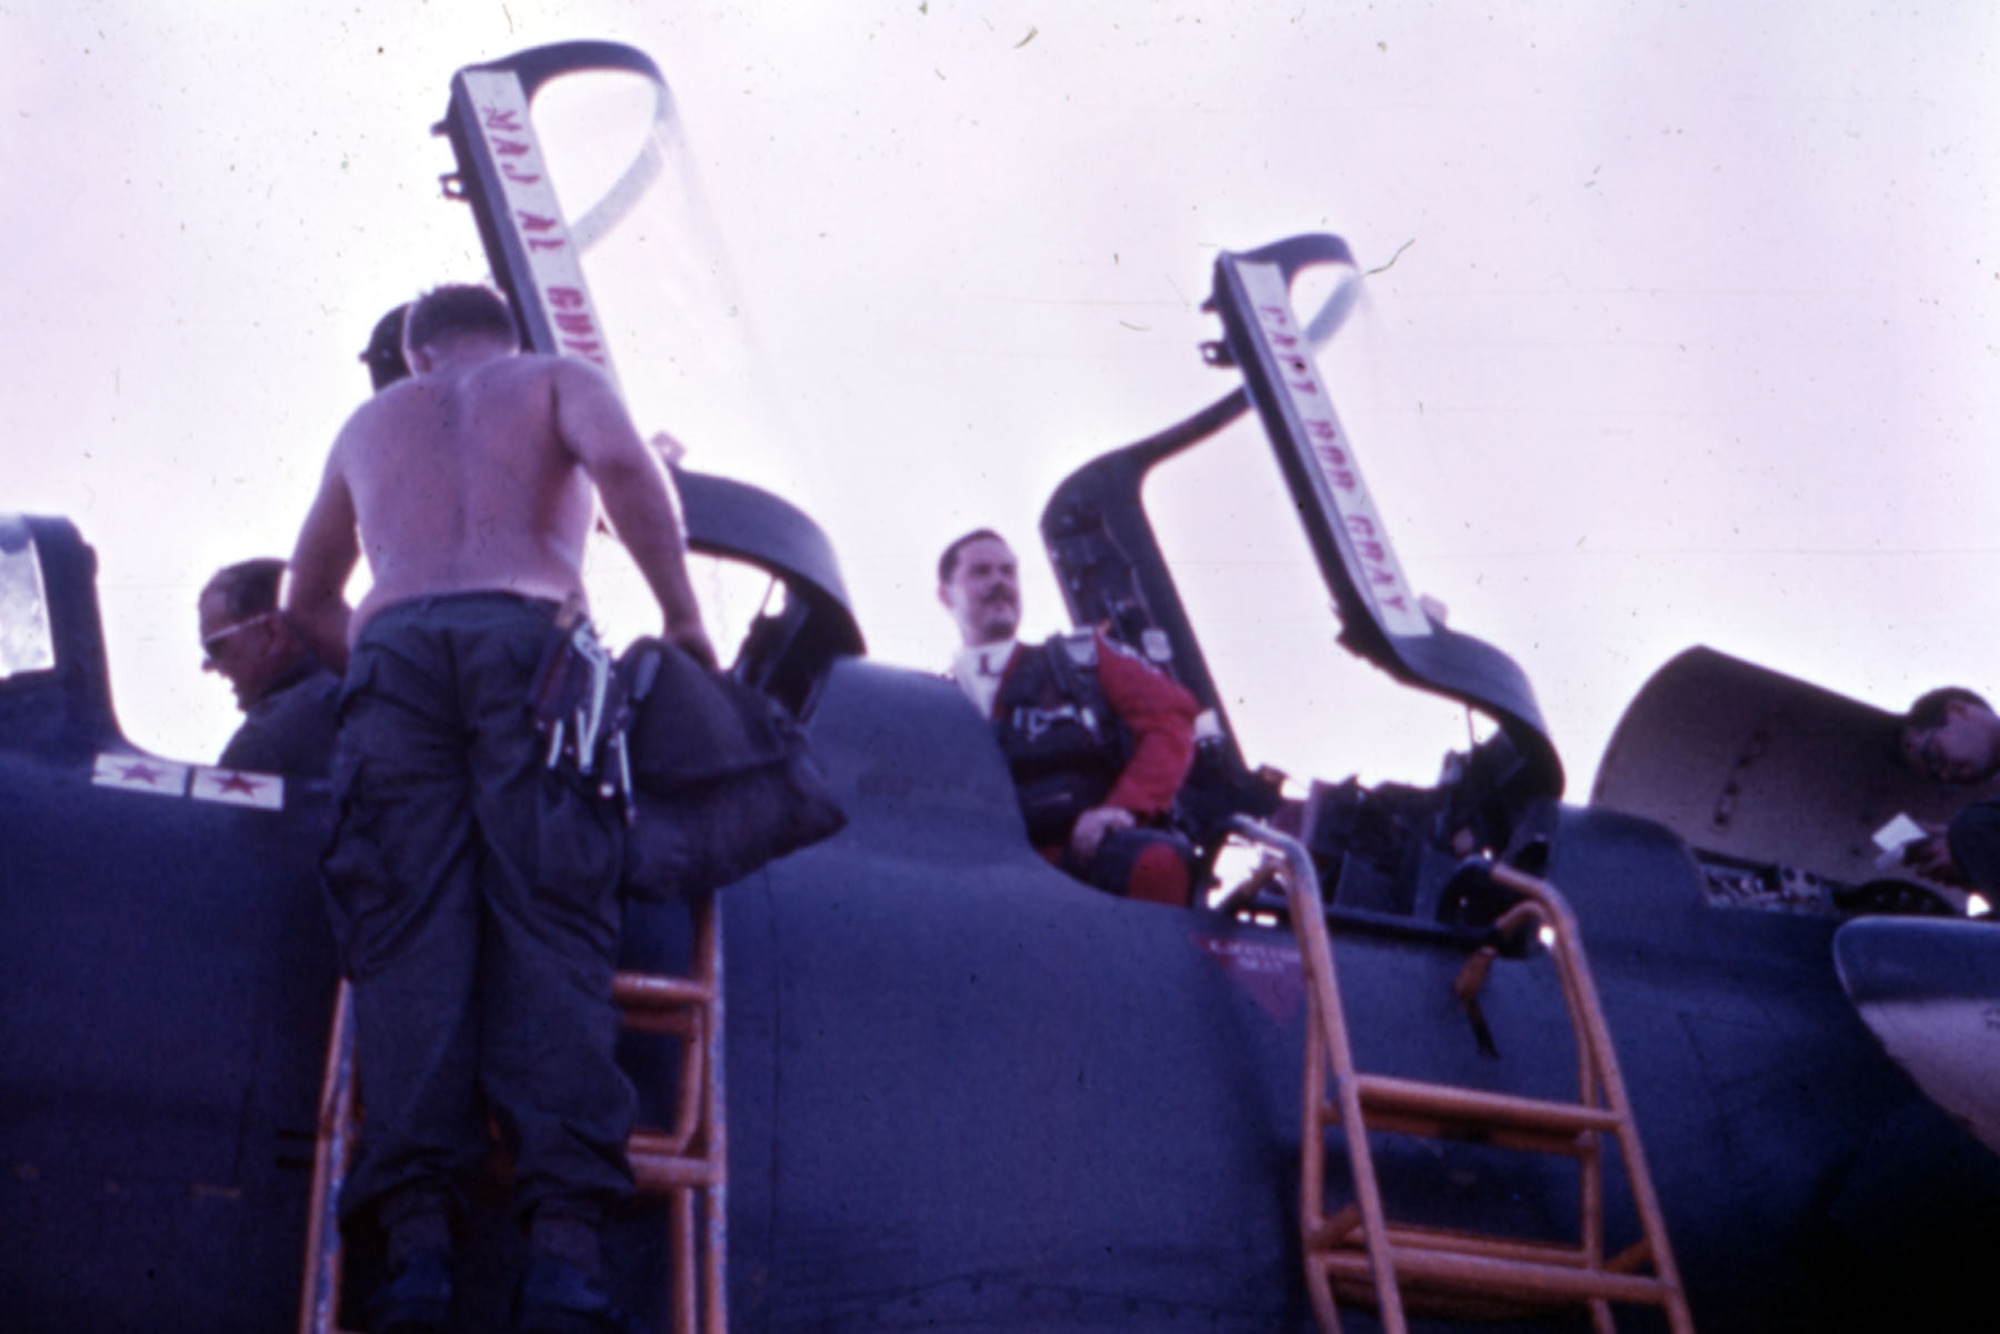 Capt. Robert “Butch” King (right) getting out of the museum’s F-105G after flying his last mission. On the way back from North Vietnam, he changed into the party suit on display. (U.S. Air Force photo)